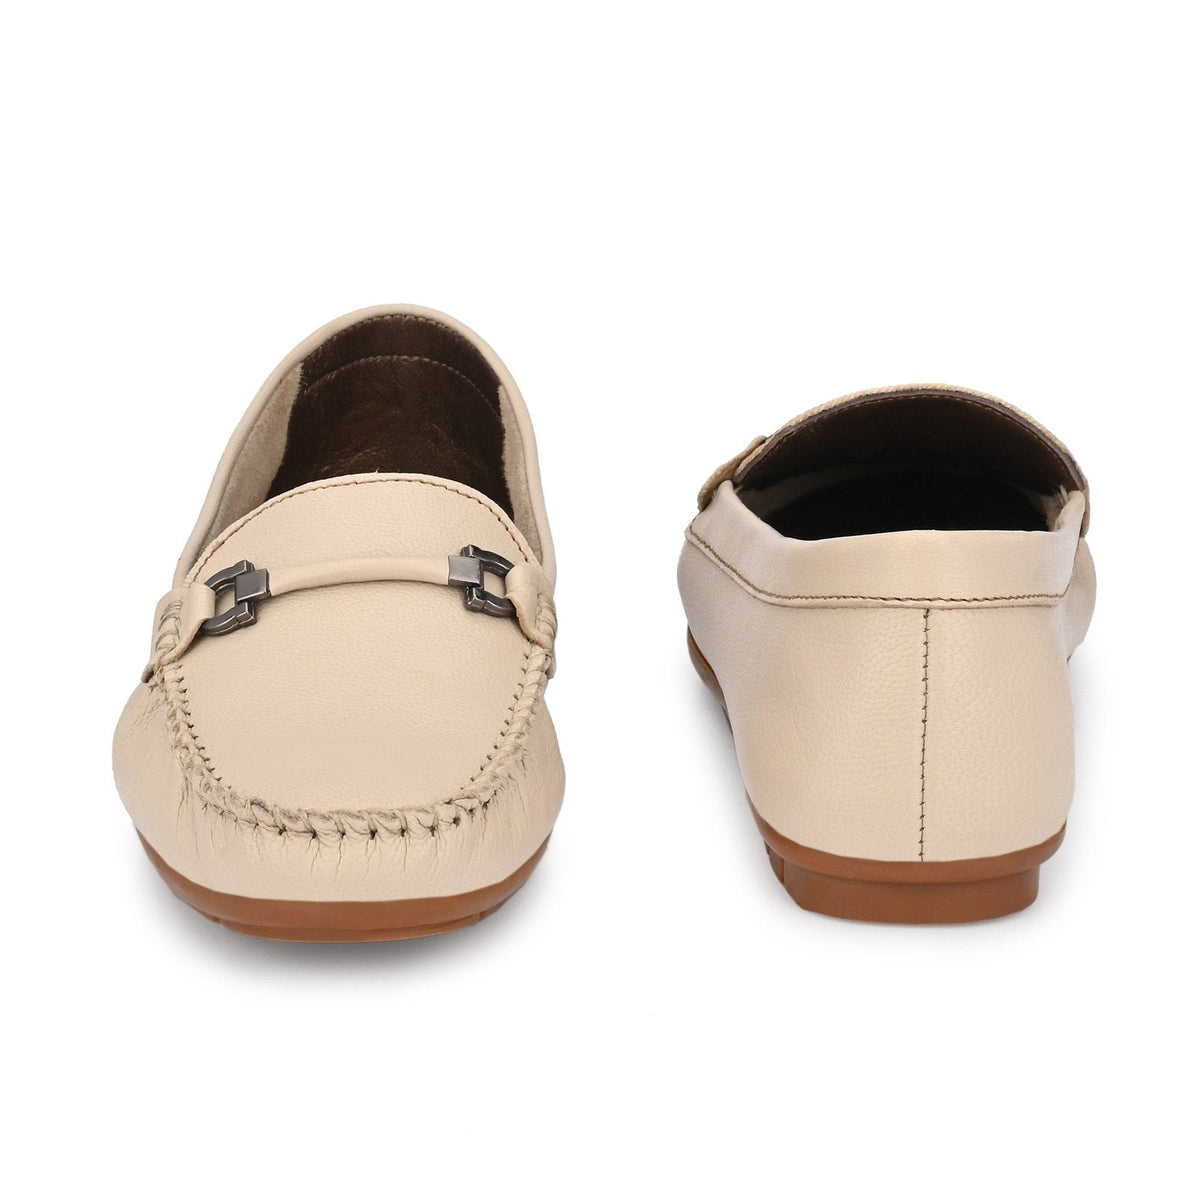 Buckled Casual Loafers For Women egoss-shoes